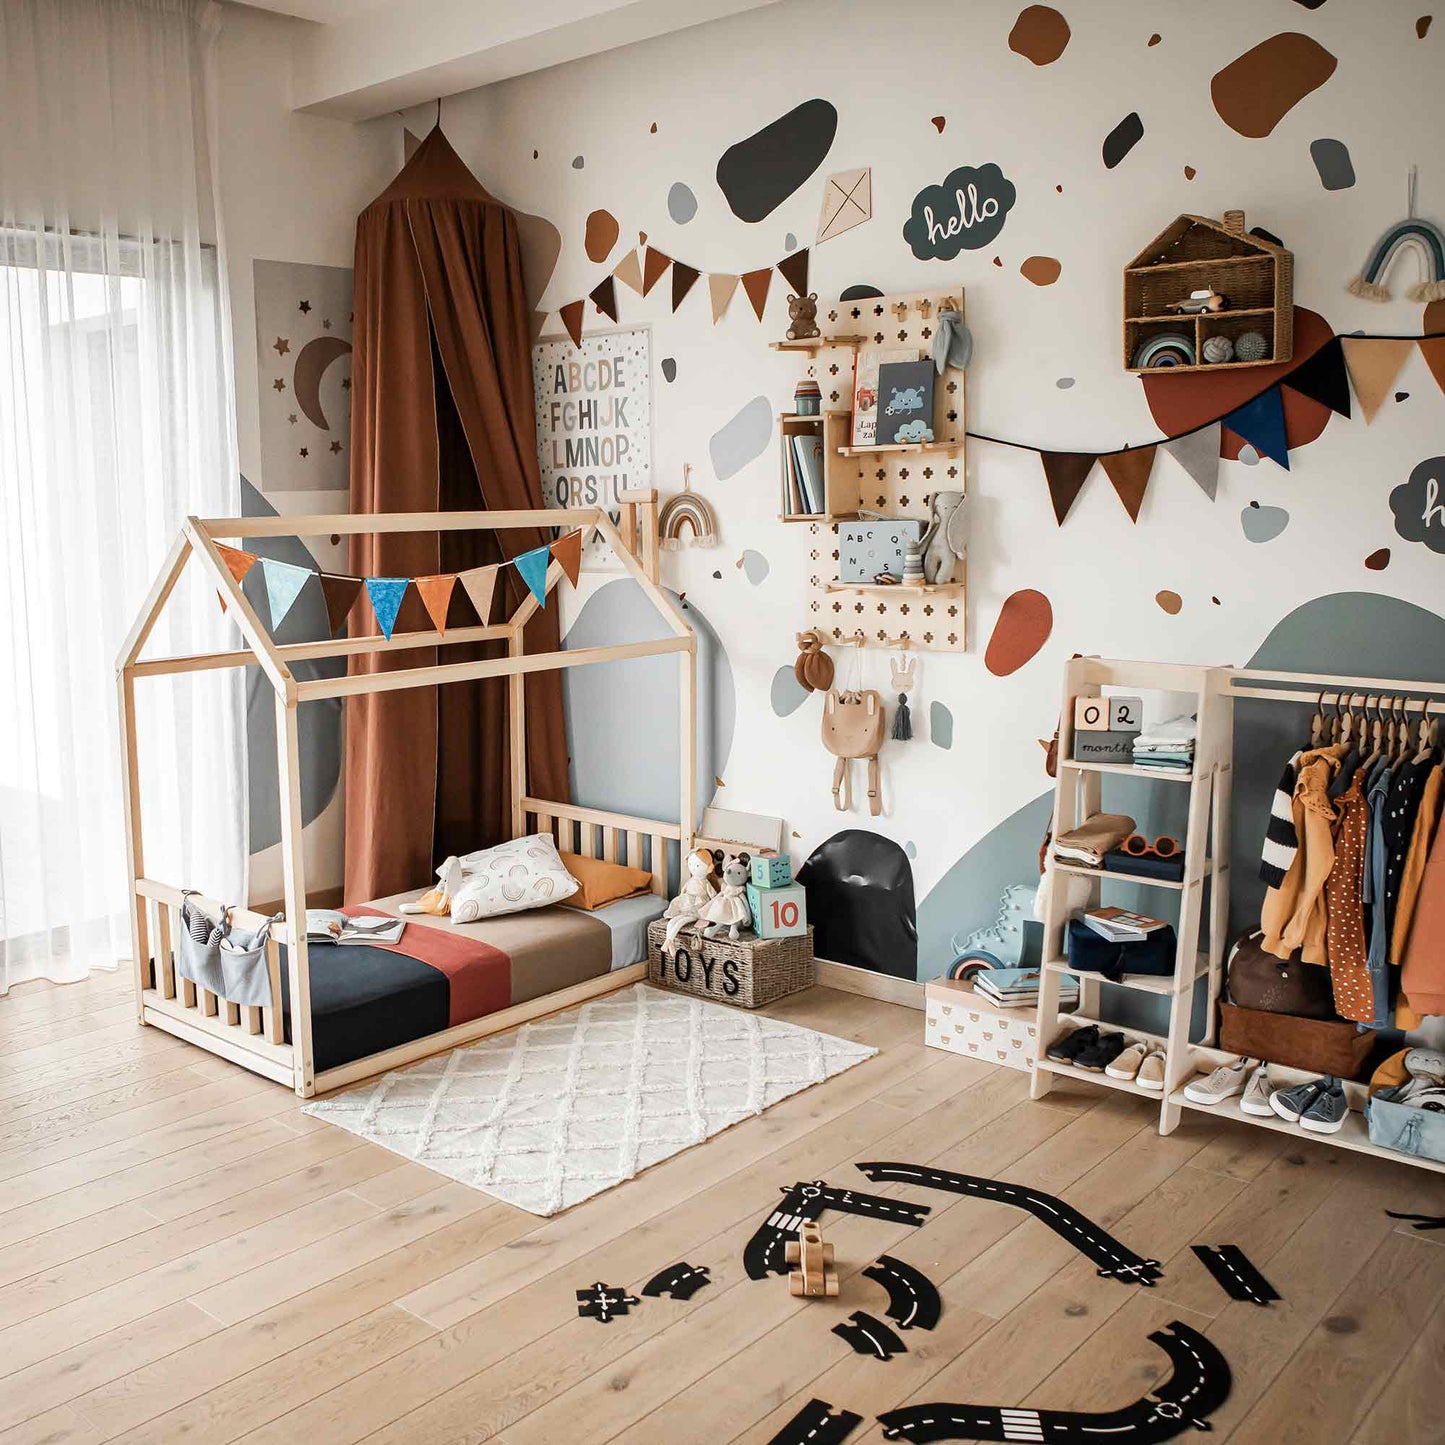 A neatly organized children's room featuring a Toddler house bed with a headboard and footboard, a shelf with toys, a clothing rack, colorful wall decals, and a play rug with a road pattern.